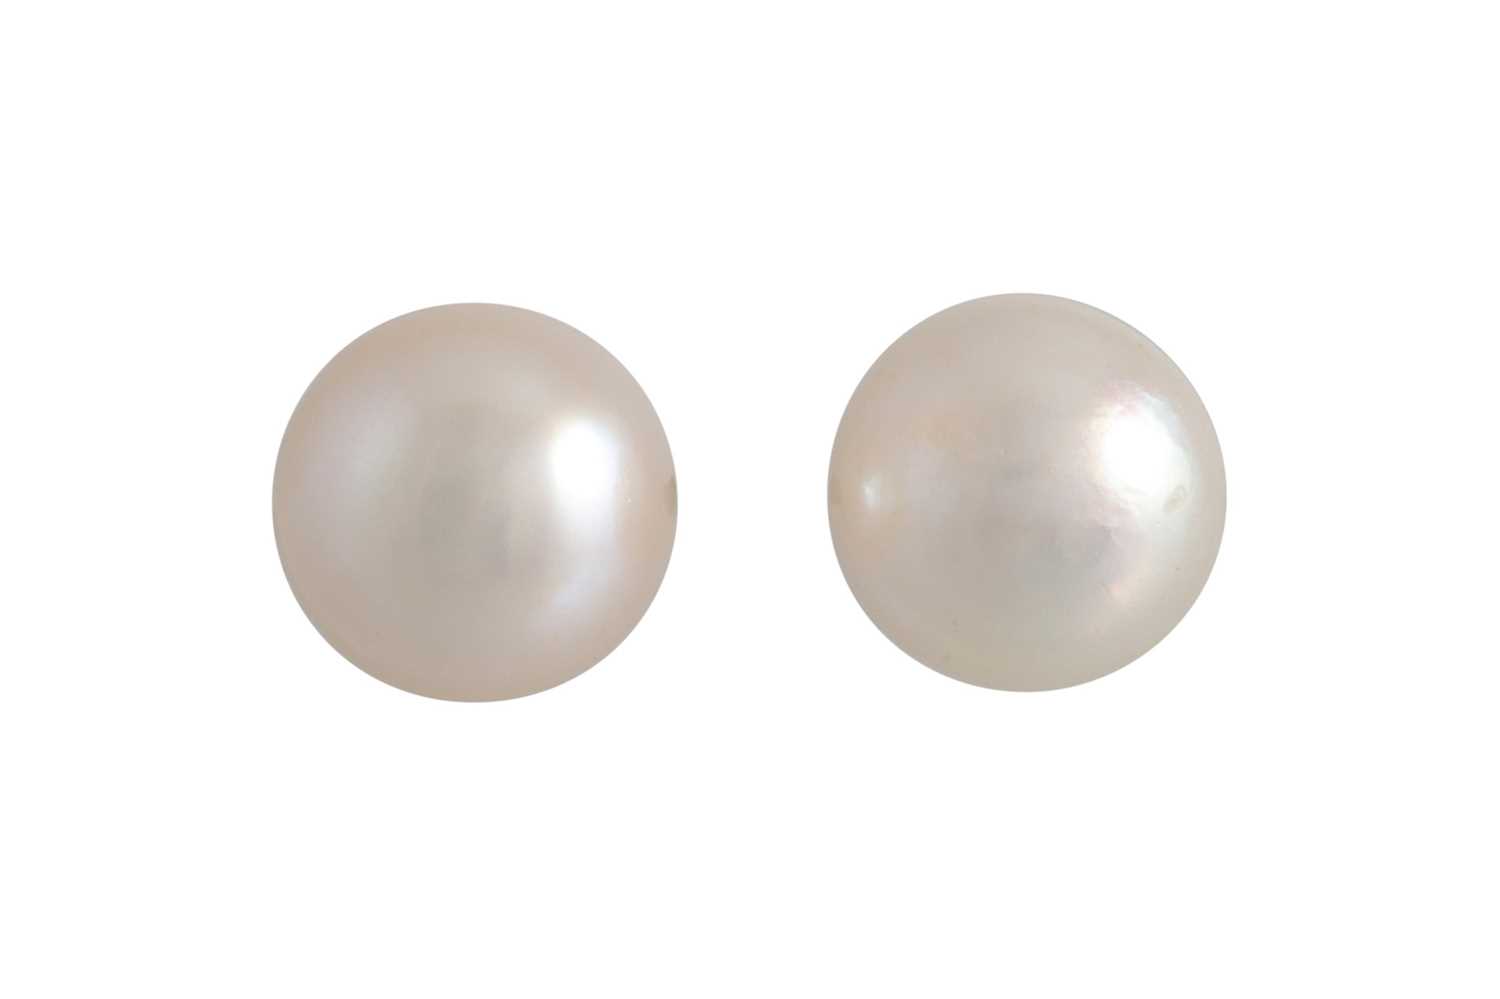 Lot 85 - A PAIR OF CULTURED PEARL EARRINGS, pink tones